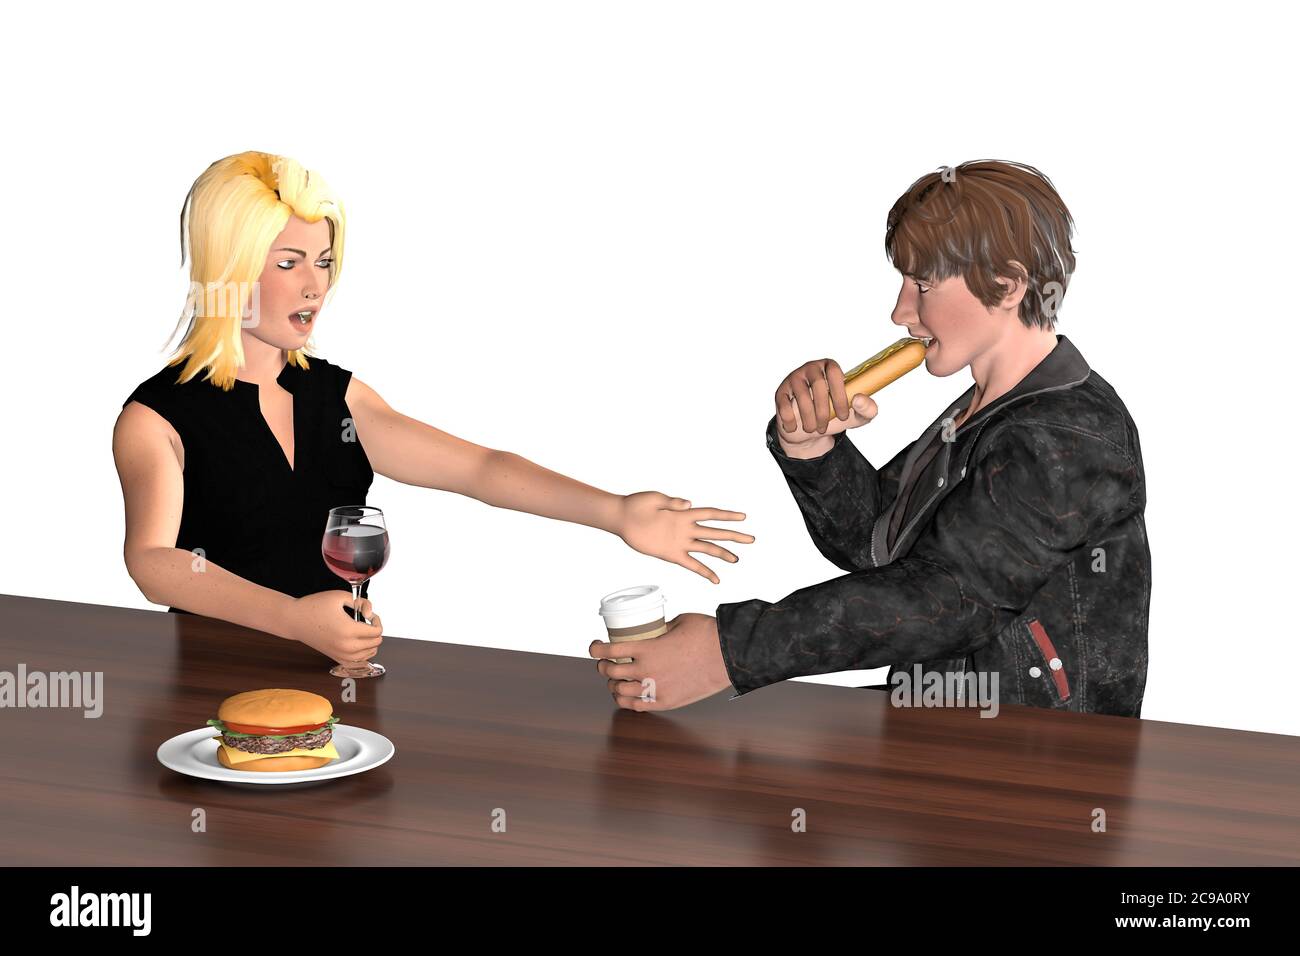 A boy with a girl at the bar table - he is eating a hotdog and she has a hamburger on the table and a glass of wine in her hand - they both are talkin Stock Photo